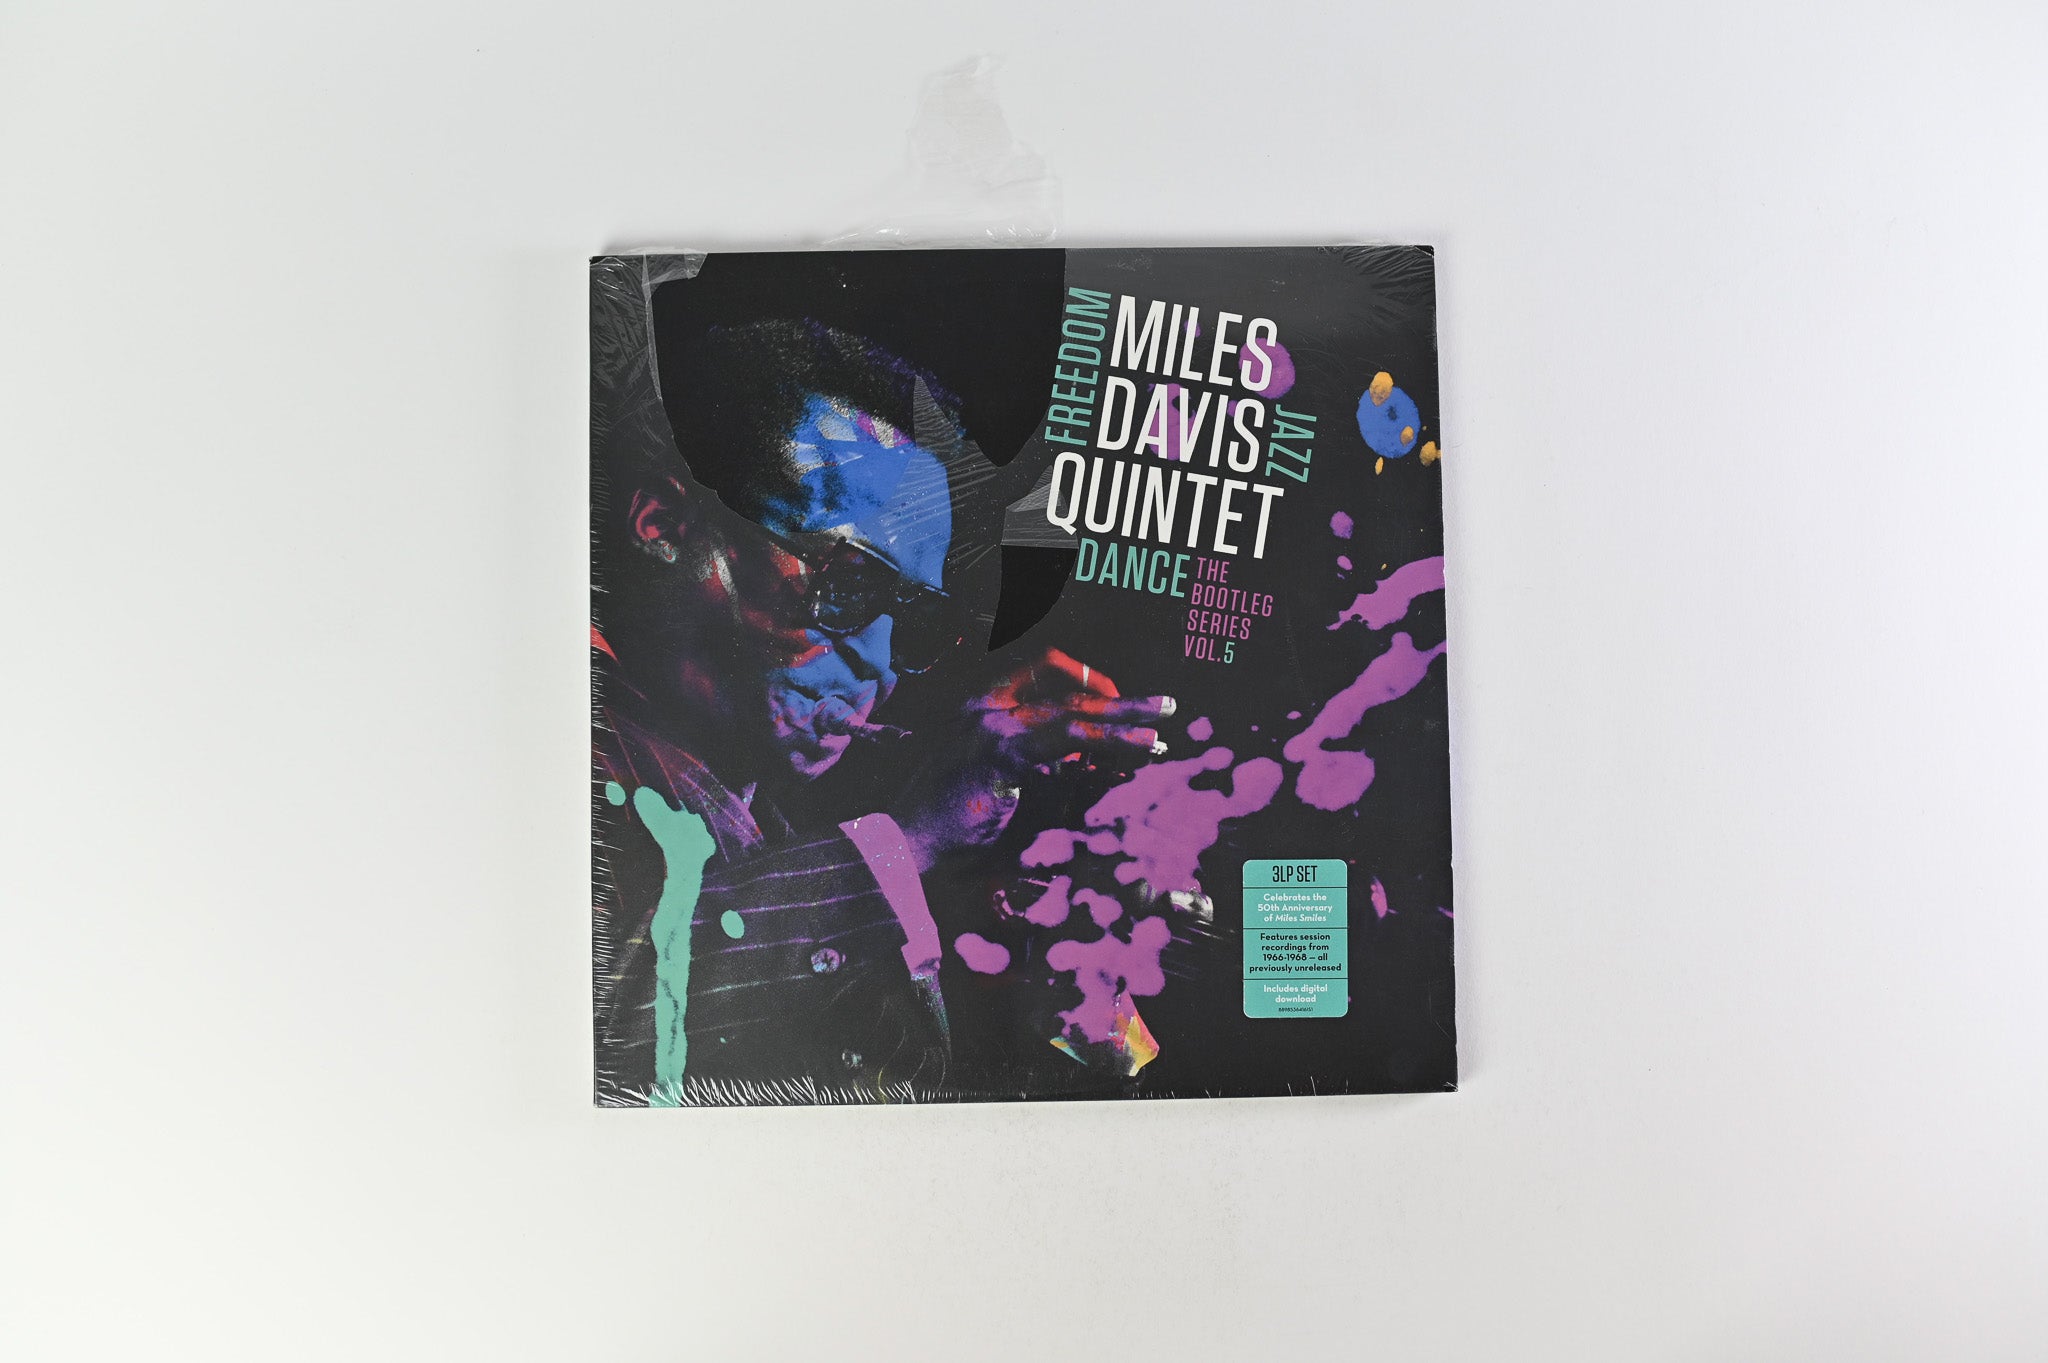 The Miles Davis Quintet - Freedom Jazz Dance (The Bootleg Series Vol. 5) SEALED on Columbia/Legacy